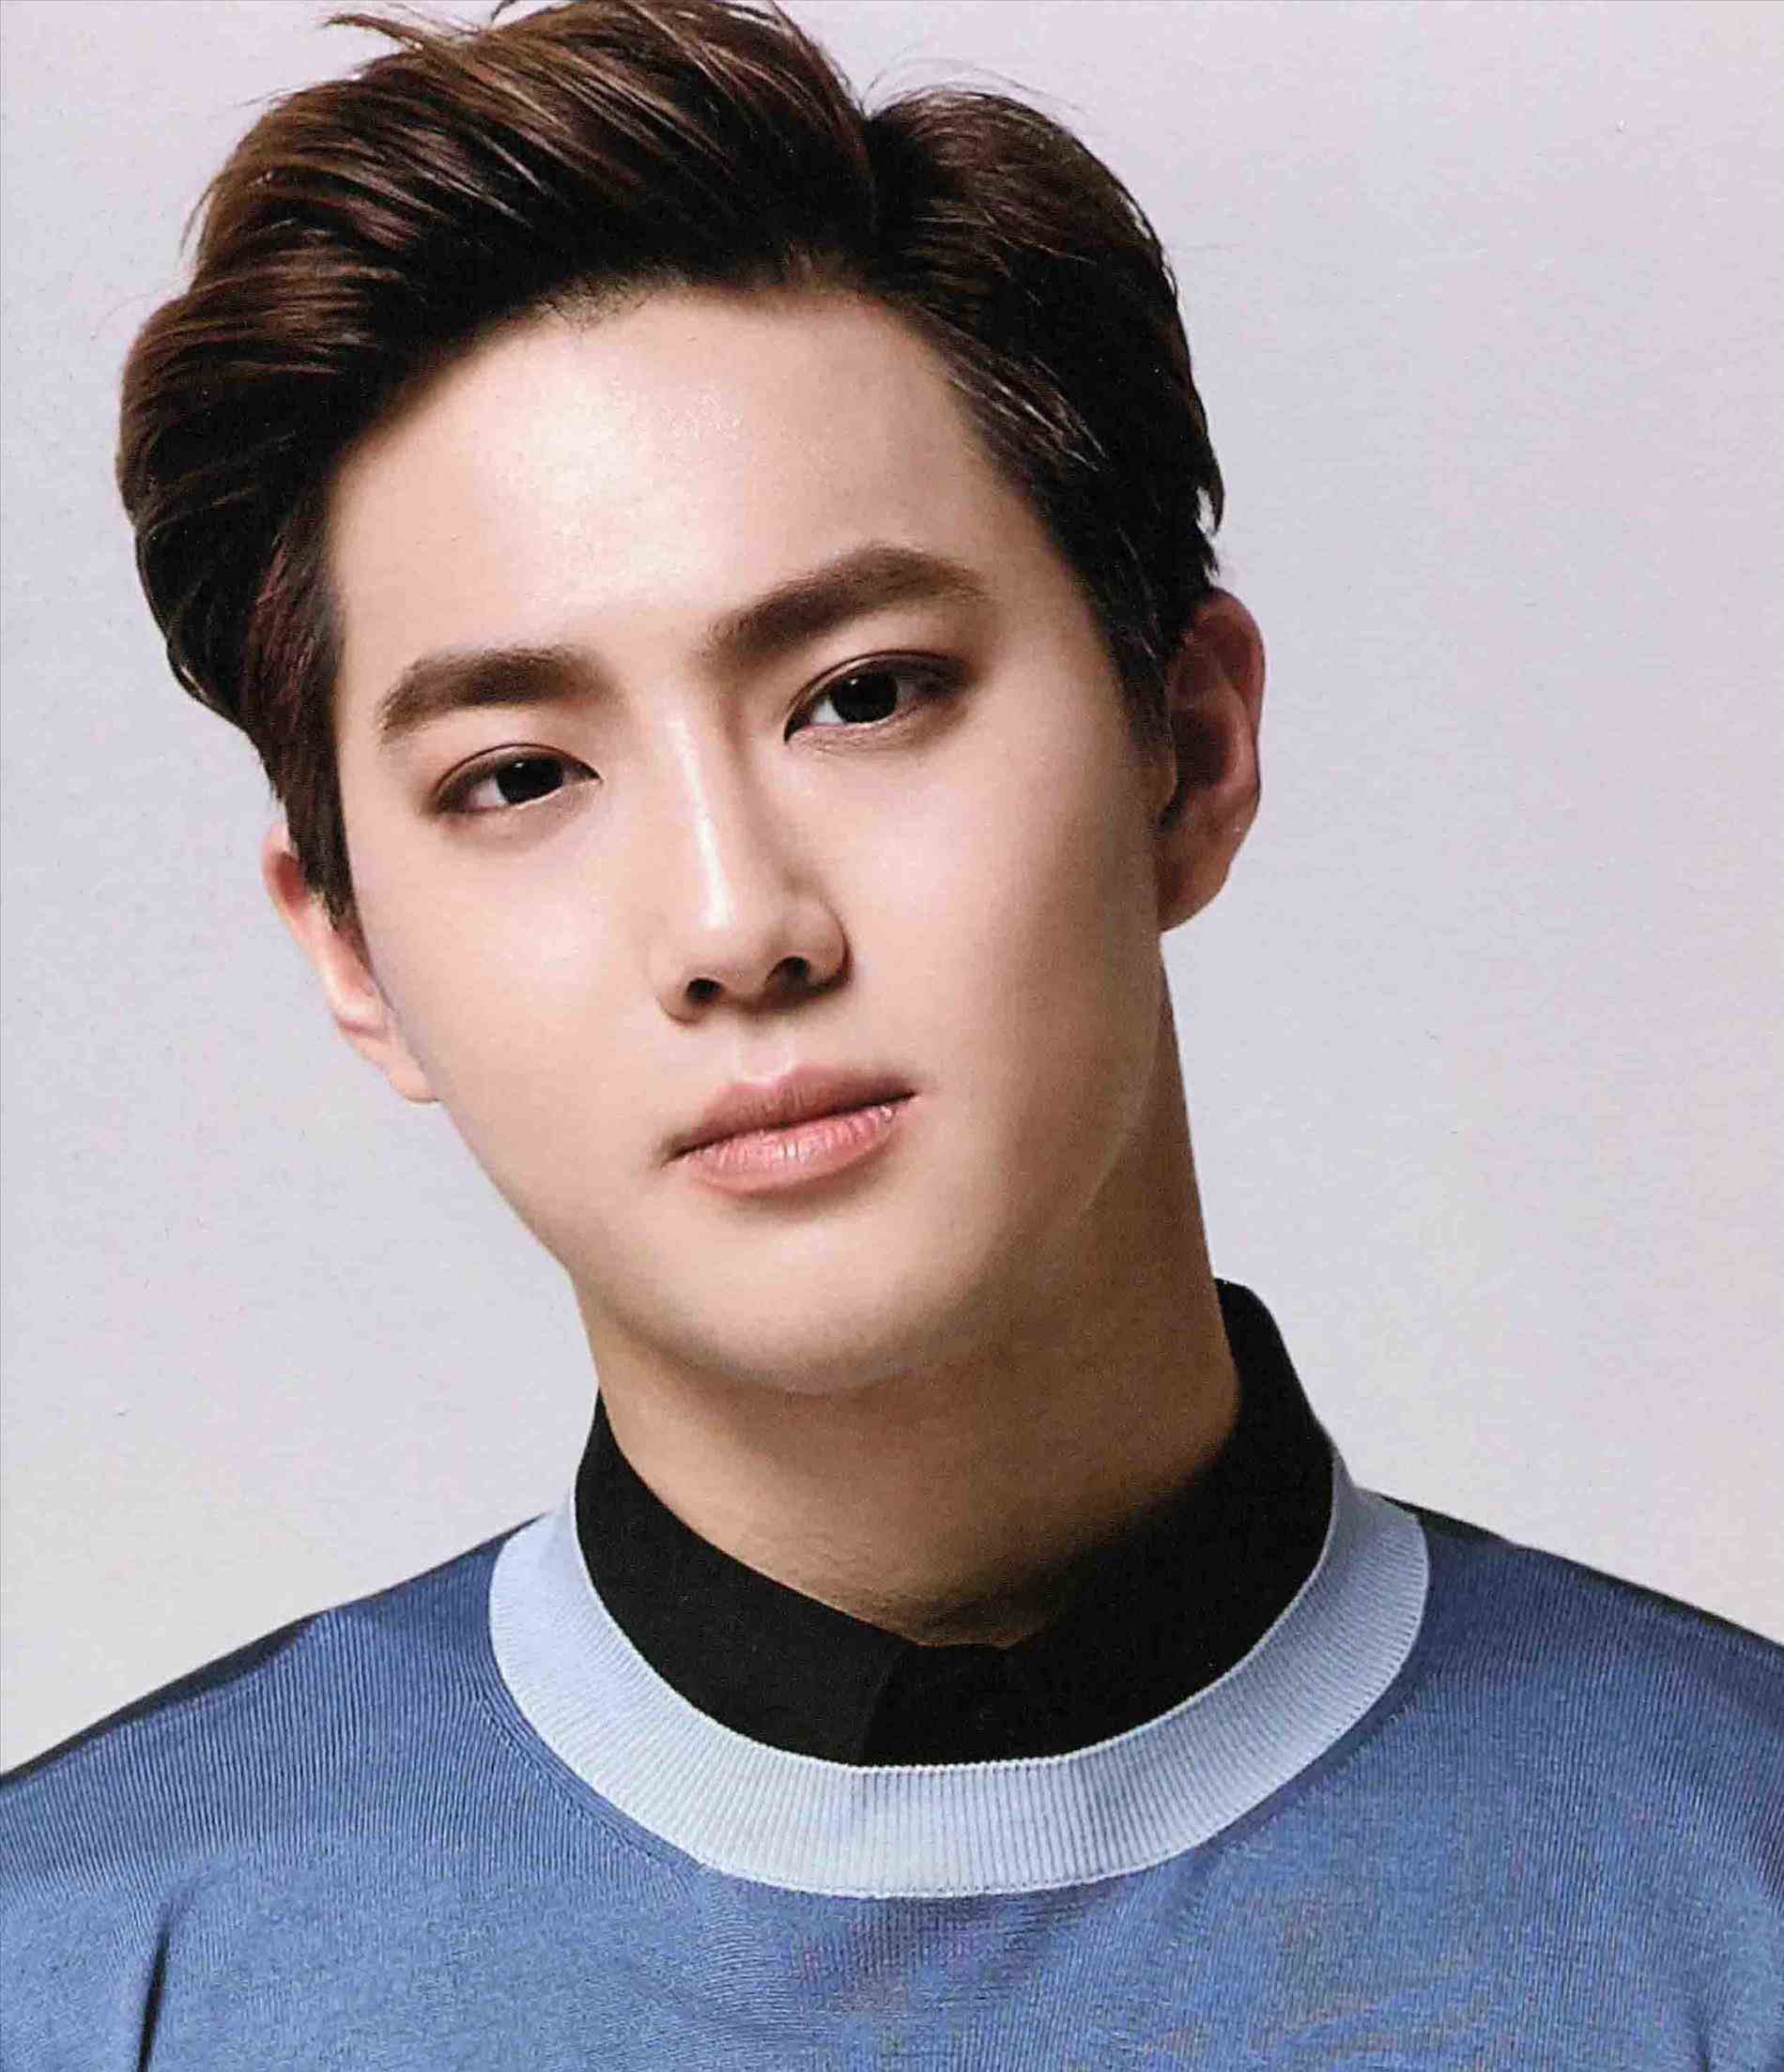  Suho  EXO  Wallpapers  Wallpaper  Cave